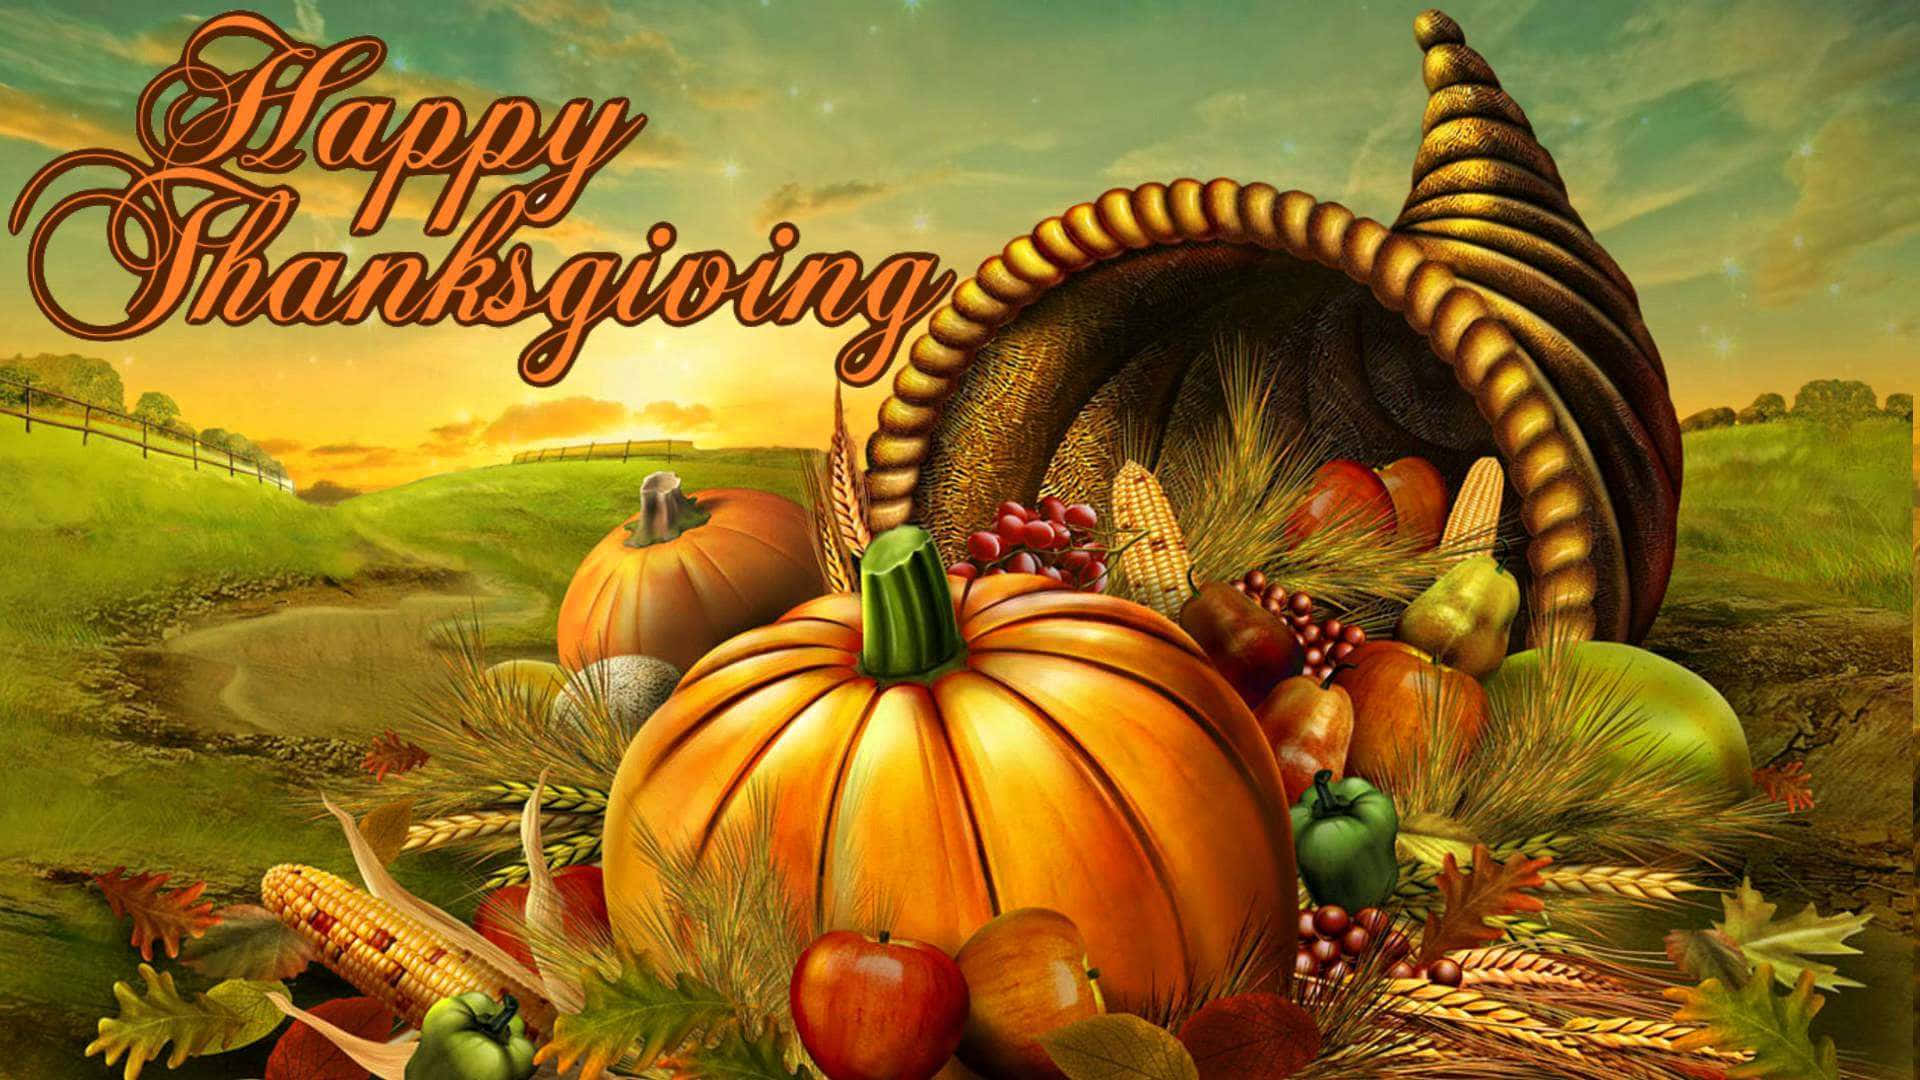 Celebrate the spirit of Thanksgiving with family and friends